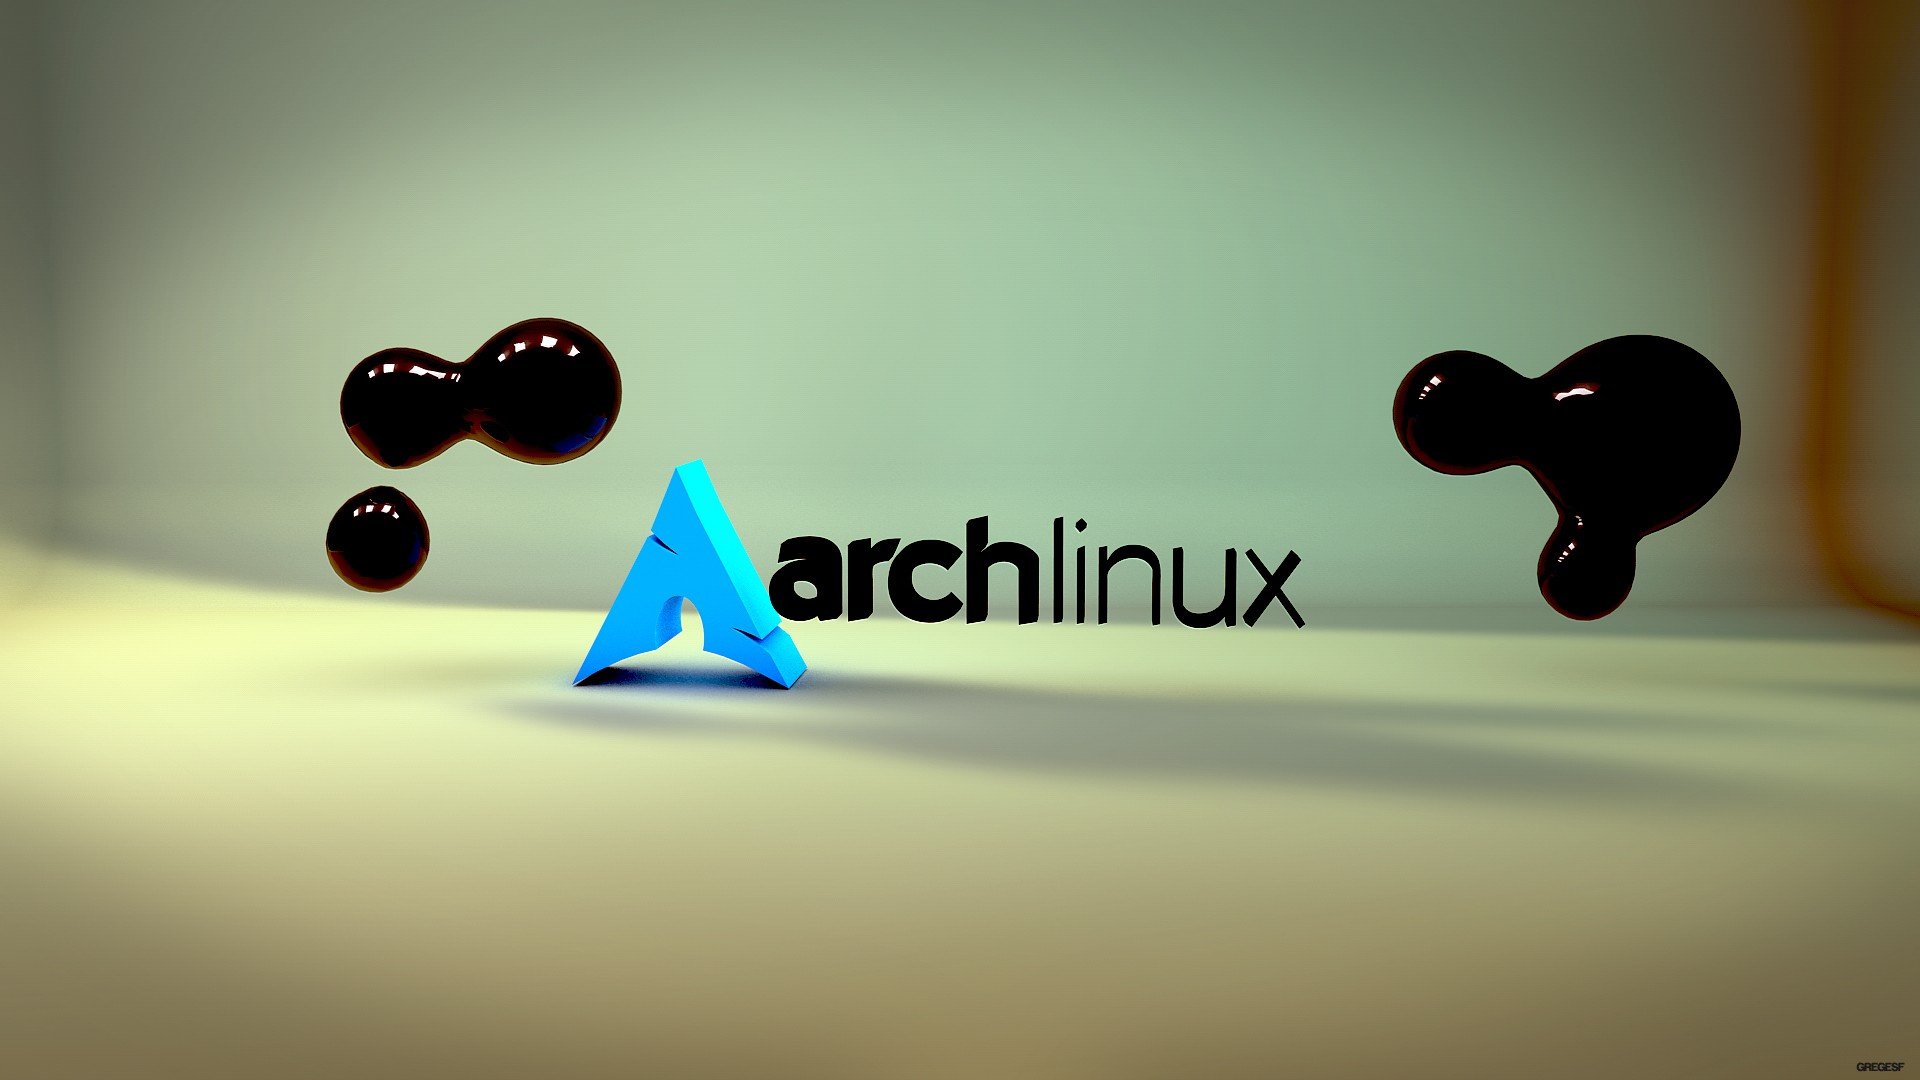 Linux, Arch Linux, Unix, Operating systems, Minimalism, Render, Arch Wallpaper